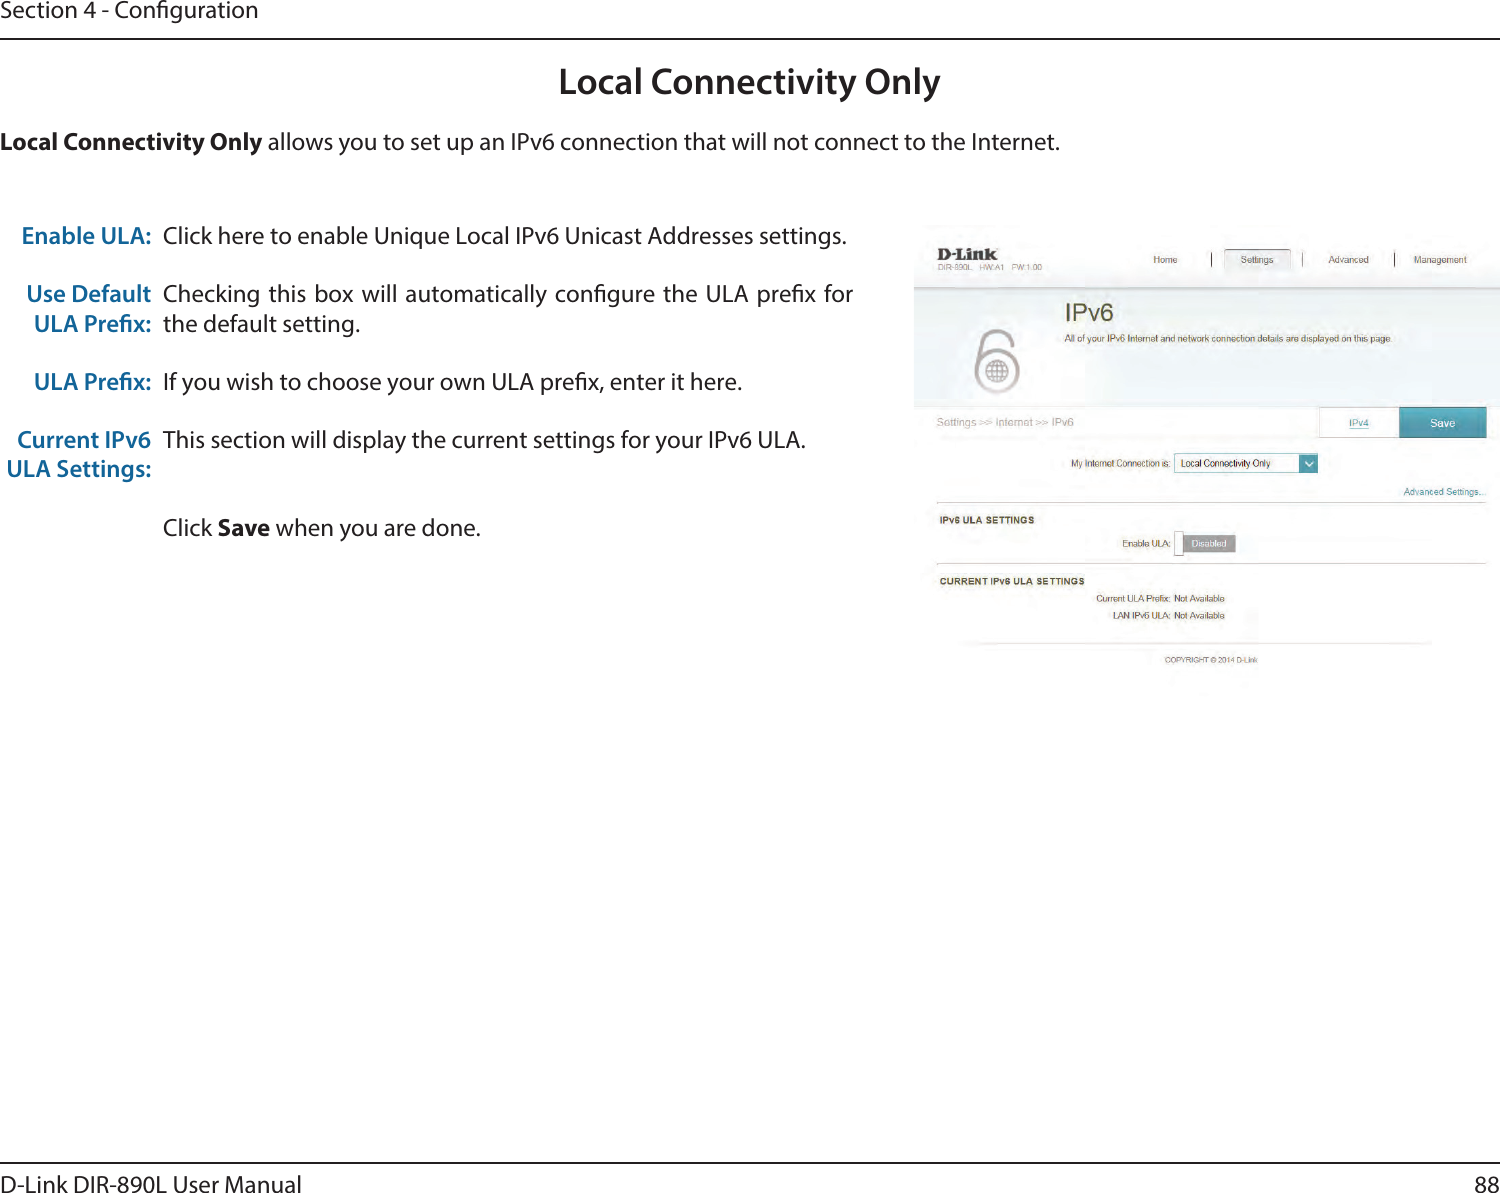 88D-Link DIR-890L User ManualSection 4 - CongurationLocal Connectivity OnlyClick here to enable Unique Local IPv6 Unicast Addresses settings.Checking this box will automatically congure the ULA prex for the default setting.If you wish to choose your own ULA prex, enter it here.This section will display the current settings for your IPv6 ULA.Click Save when you are done.Enable ULA:Use Default ULA Prex:ULA Prex:Current IPv6 ULA Settings:Local Connectivity Only allows you to set up an IPv6 connection that will not connect to the Internet.